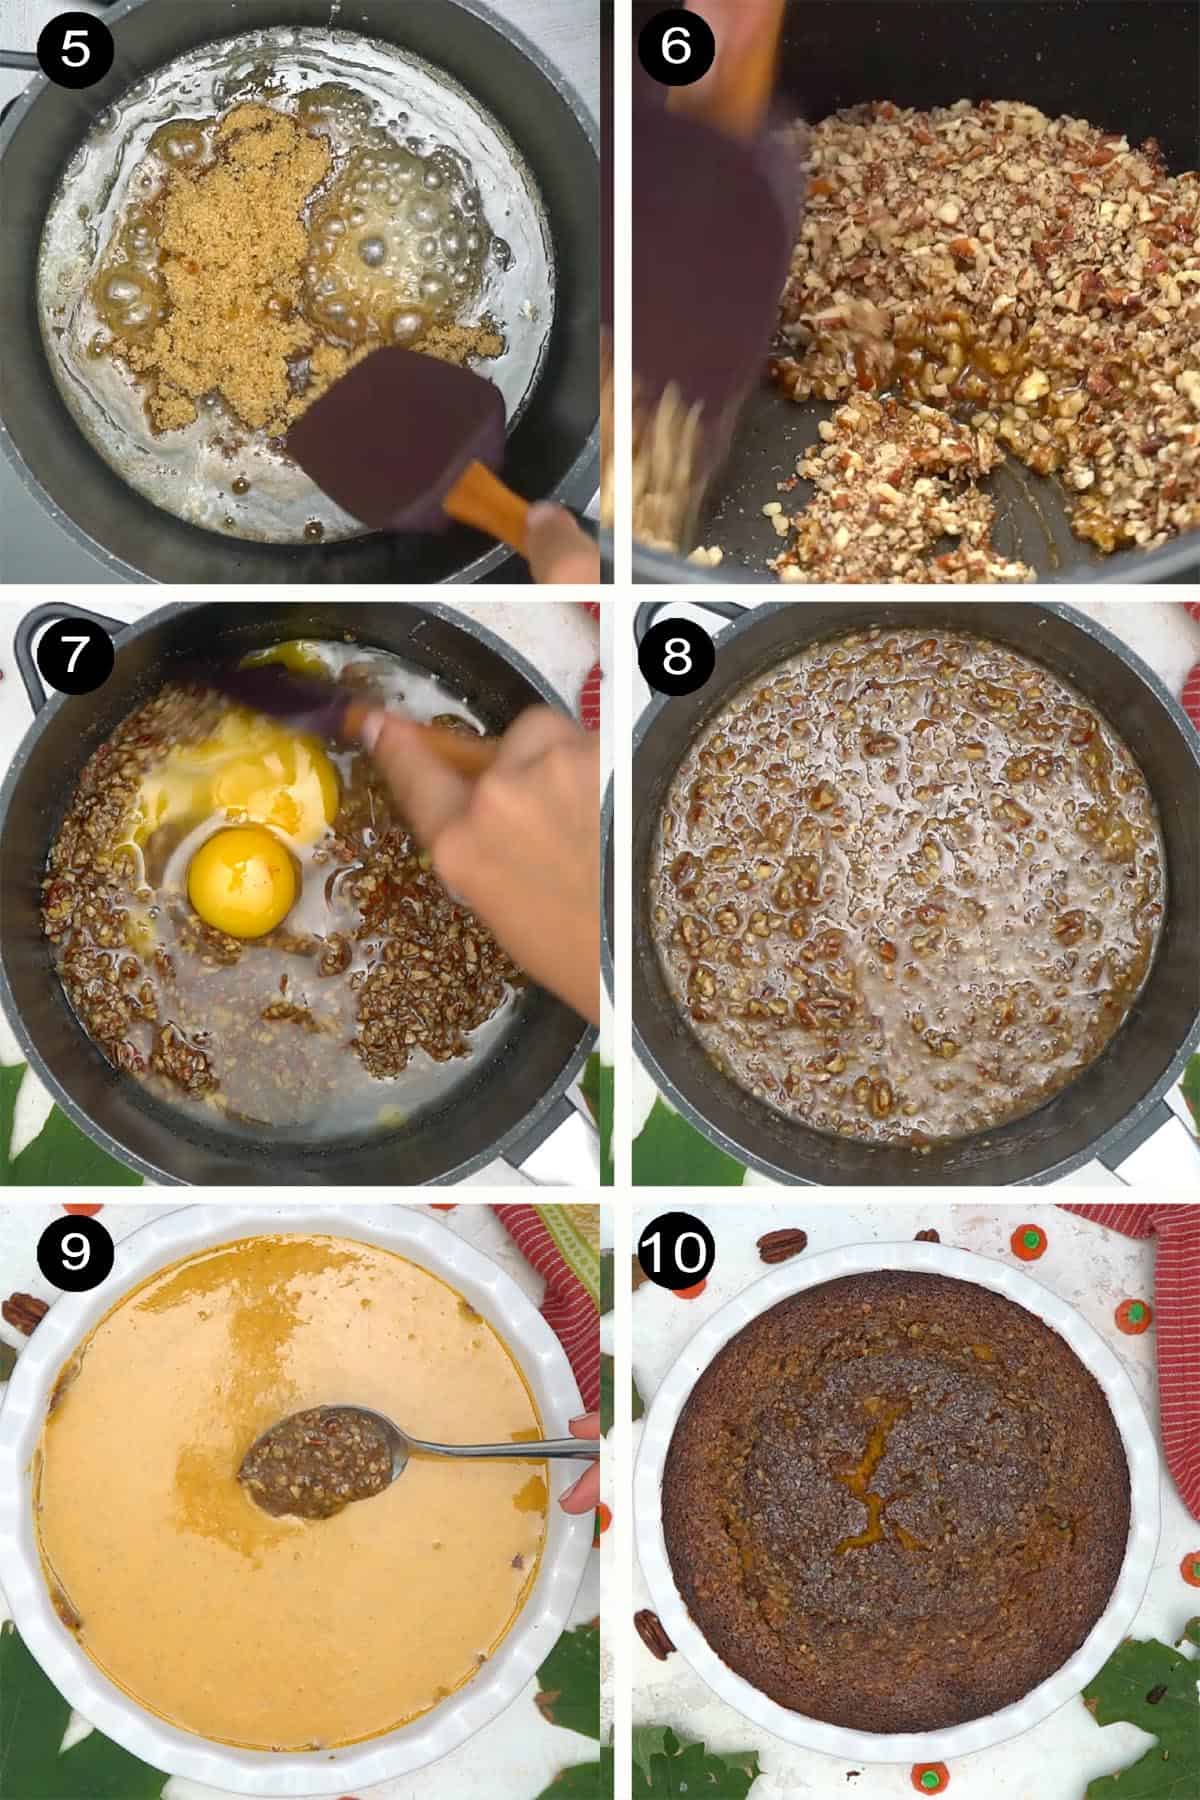 Steps to make pecan filling and putting pie together.